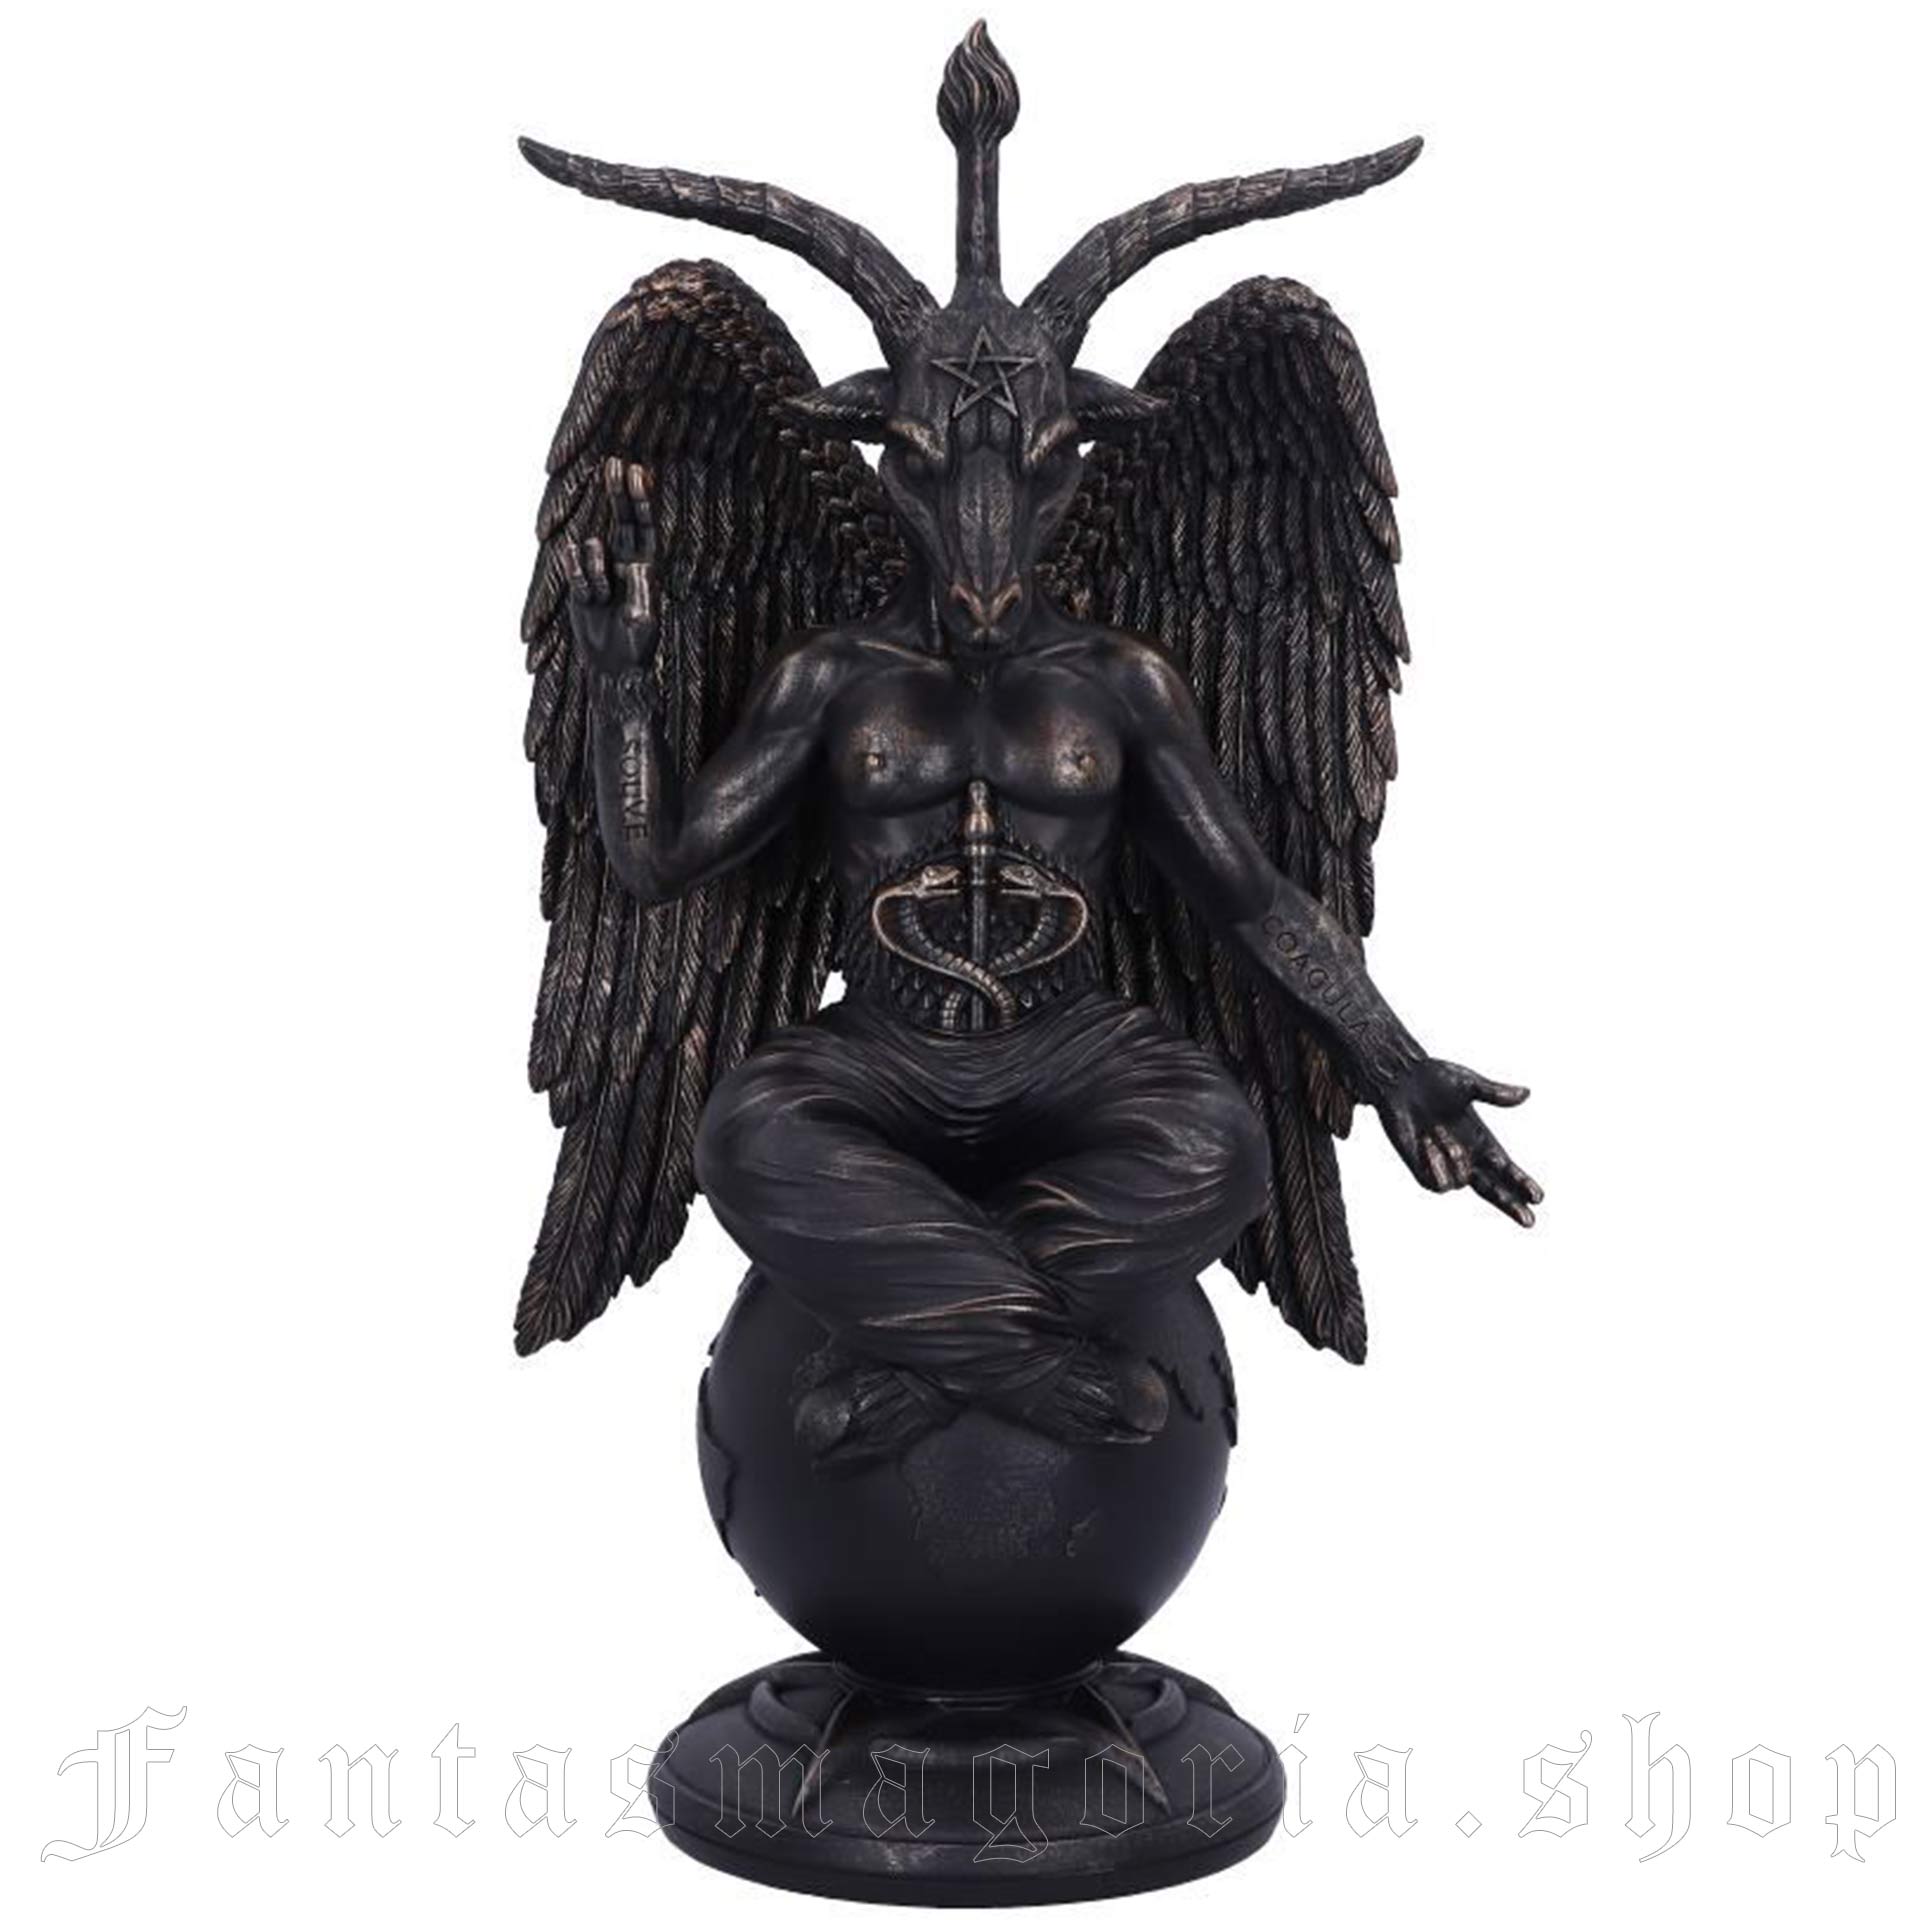 Baphomet Antiquity Large Figurine by Nemesis Now brand